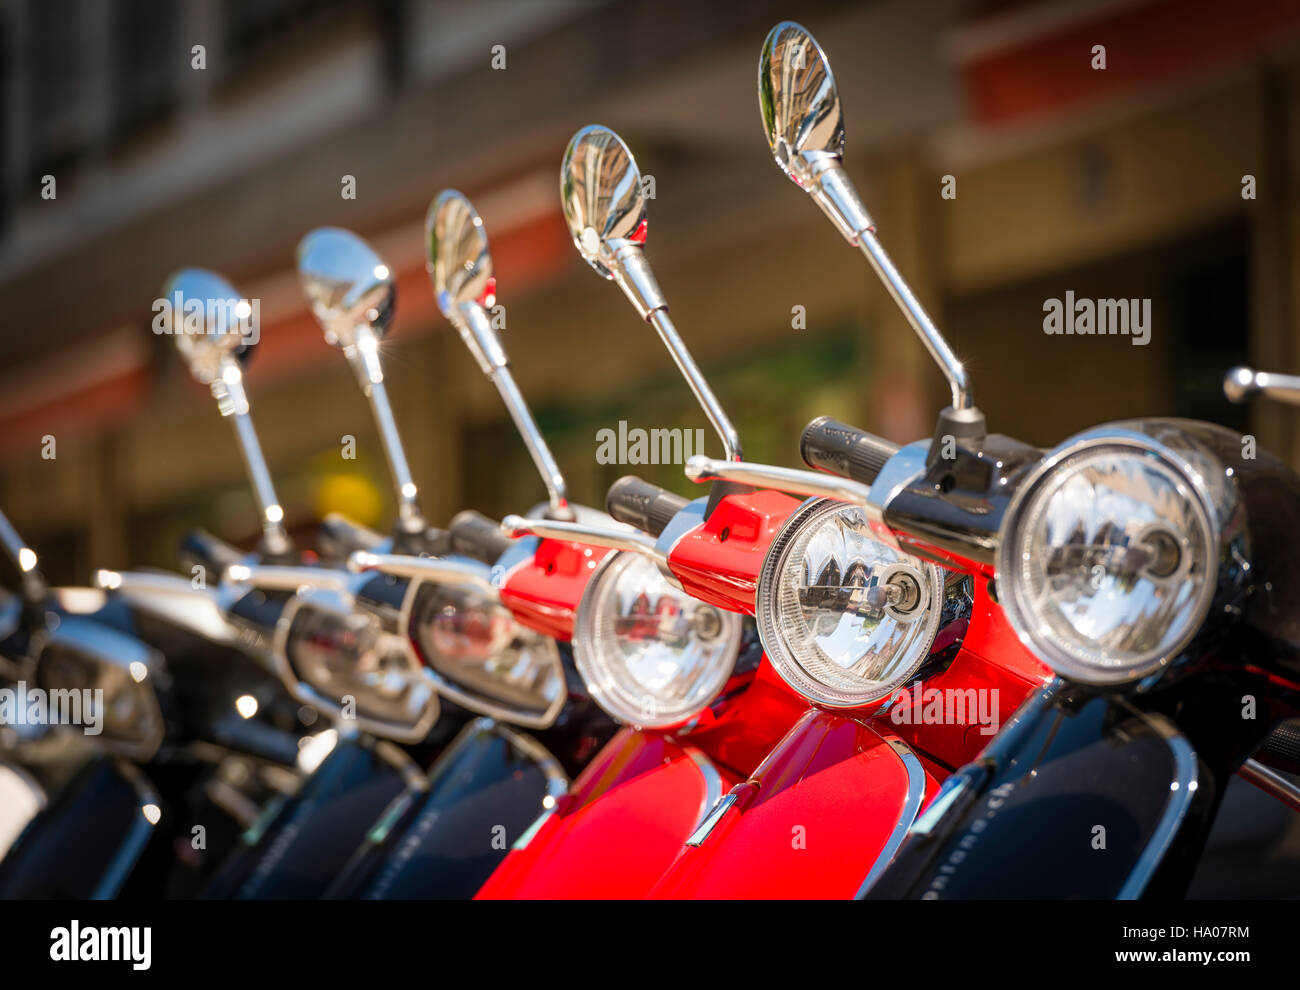 Many bright colorful Vespa motor scooters are lined up outside on a sunny street in Zurich, Switzerland Stock Photo